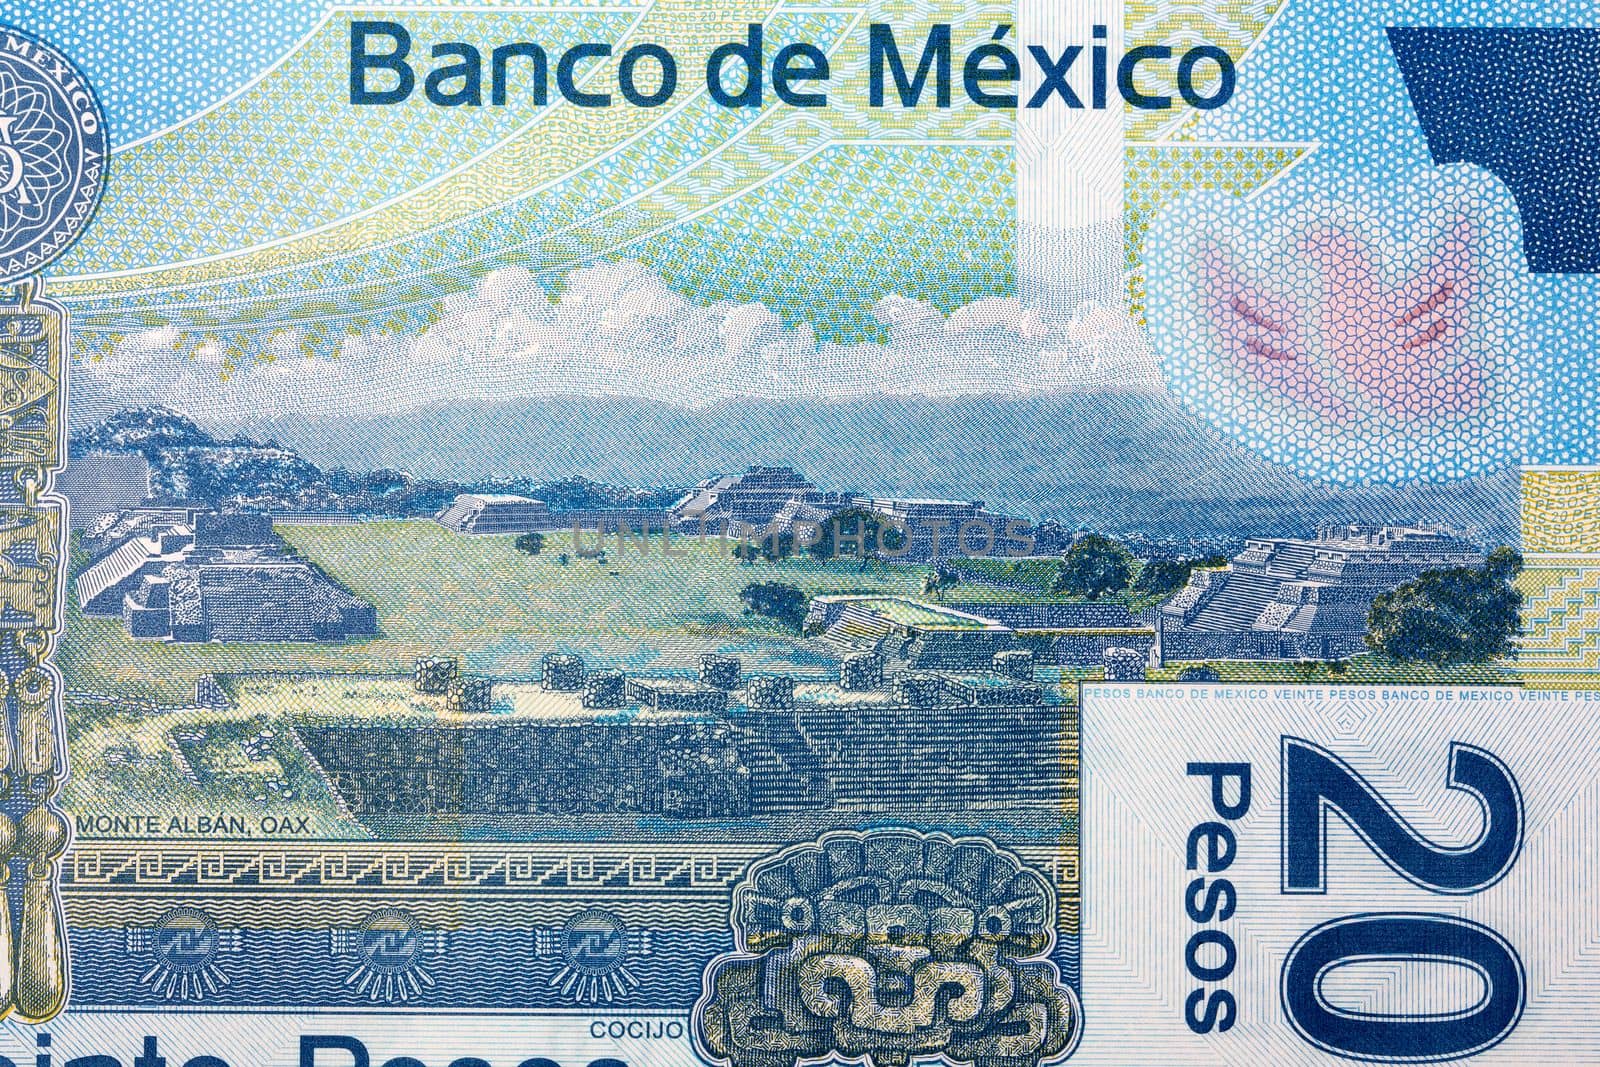 View of Monte Alban from Mexican money by johan10